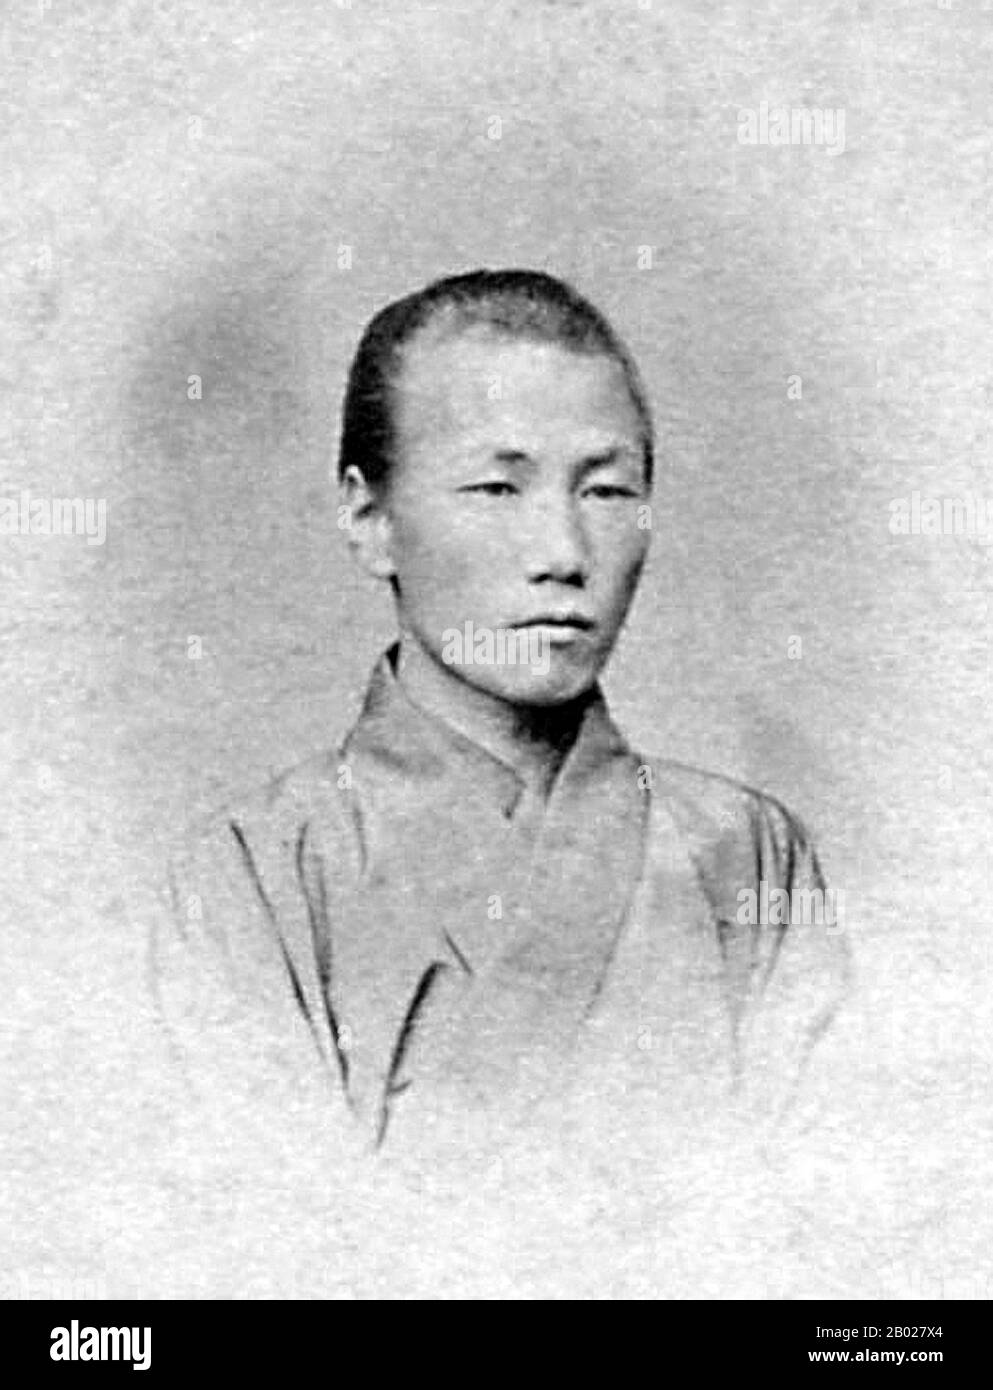 Ueno Hikoma (上野 彦馬, October 15, 1838 – May 22, 1904) was a pioneer Japanese photographer, born in Nagasaki. He is noted for his fine portraits, often of important Japanese and foreign figures, and for his excellent landscapes, particularly of Nagasaki and its surroundings. Ueno was a major figure in nineteenth-century Japanese photography as a commercially and artistically successful photographer and as an instructor. Stock Photo